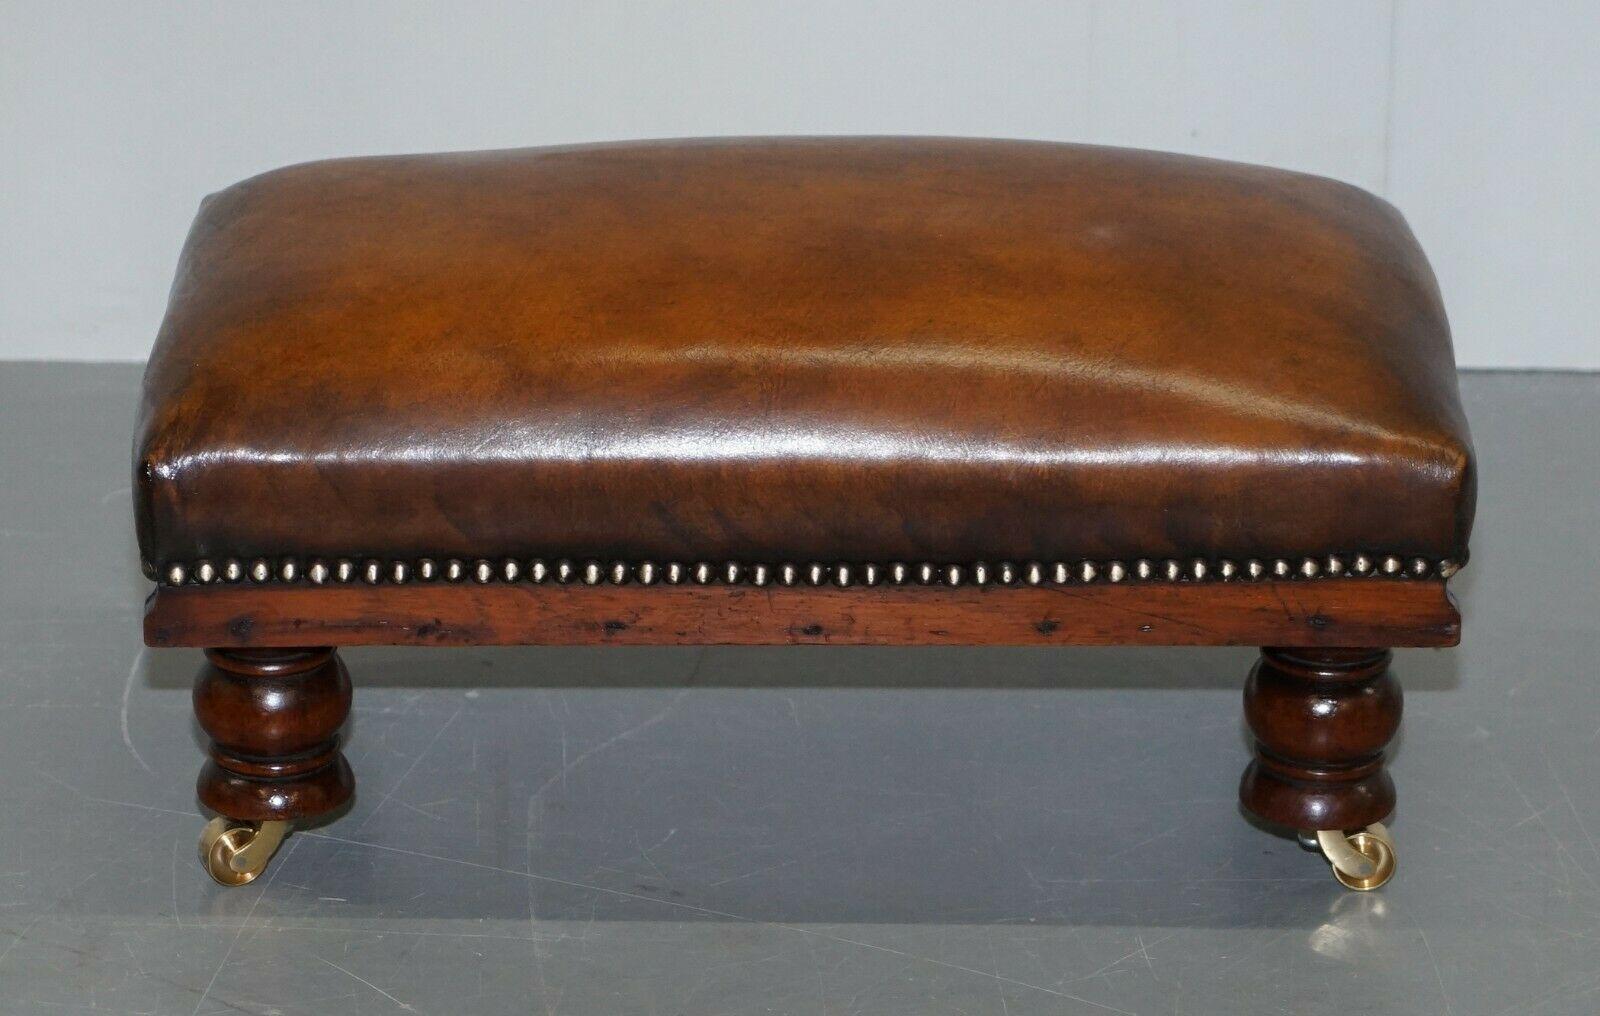 We are delighted to offer for sale this sublime antique fully restored whisky brown leather footstool

A very good looking and comfortable little stool, the leather has been stripped back and hand dyed this glorious whisky brown colour, the frame